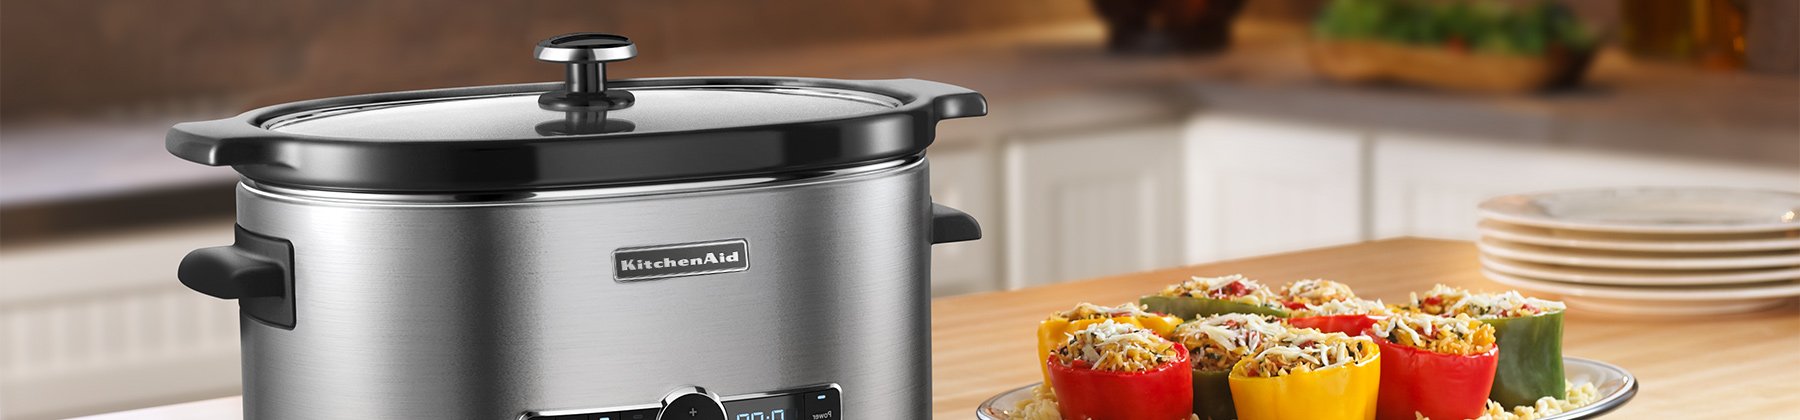 https://cdn.everythingkitchens.com/media/wysiwyg/images/Category_Headers/Slow-Cookers.jpg